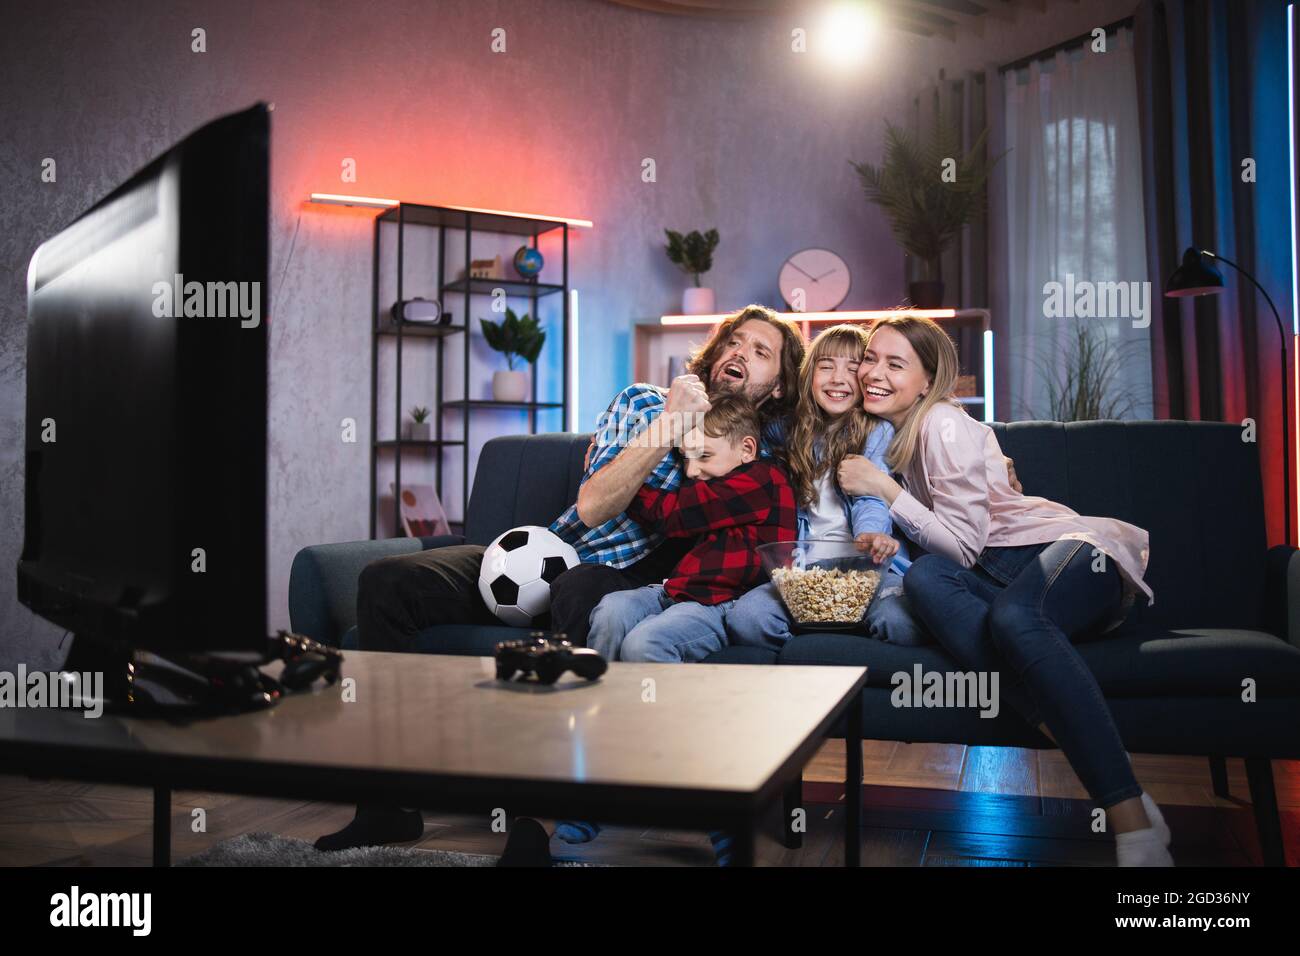 Happy young parents with son and daughter watching football game on TV. Caucasian family sitting on couch and embracing each other while celebrating goal. Stock Photo